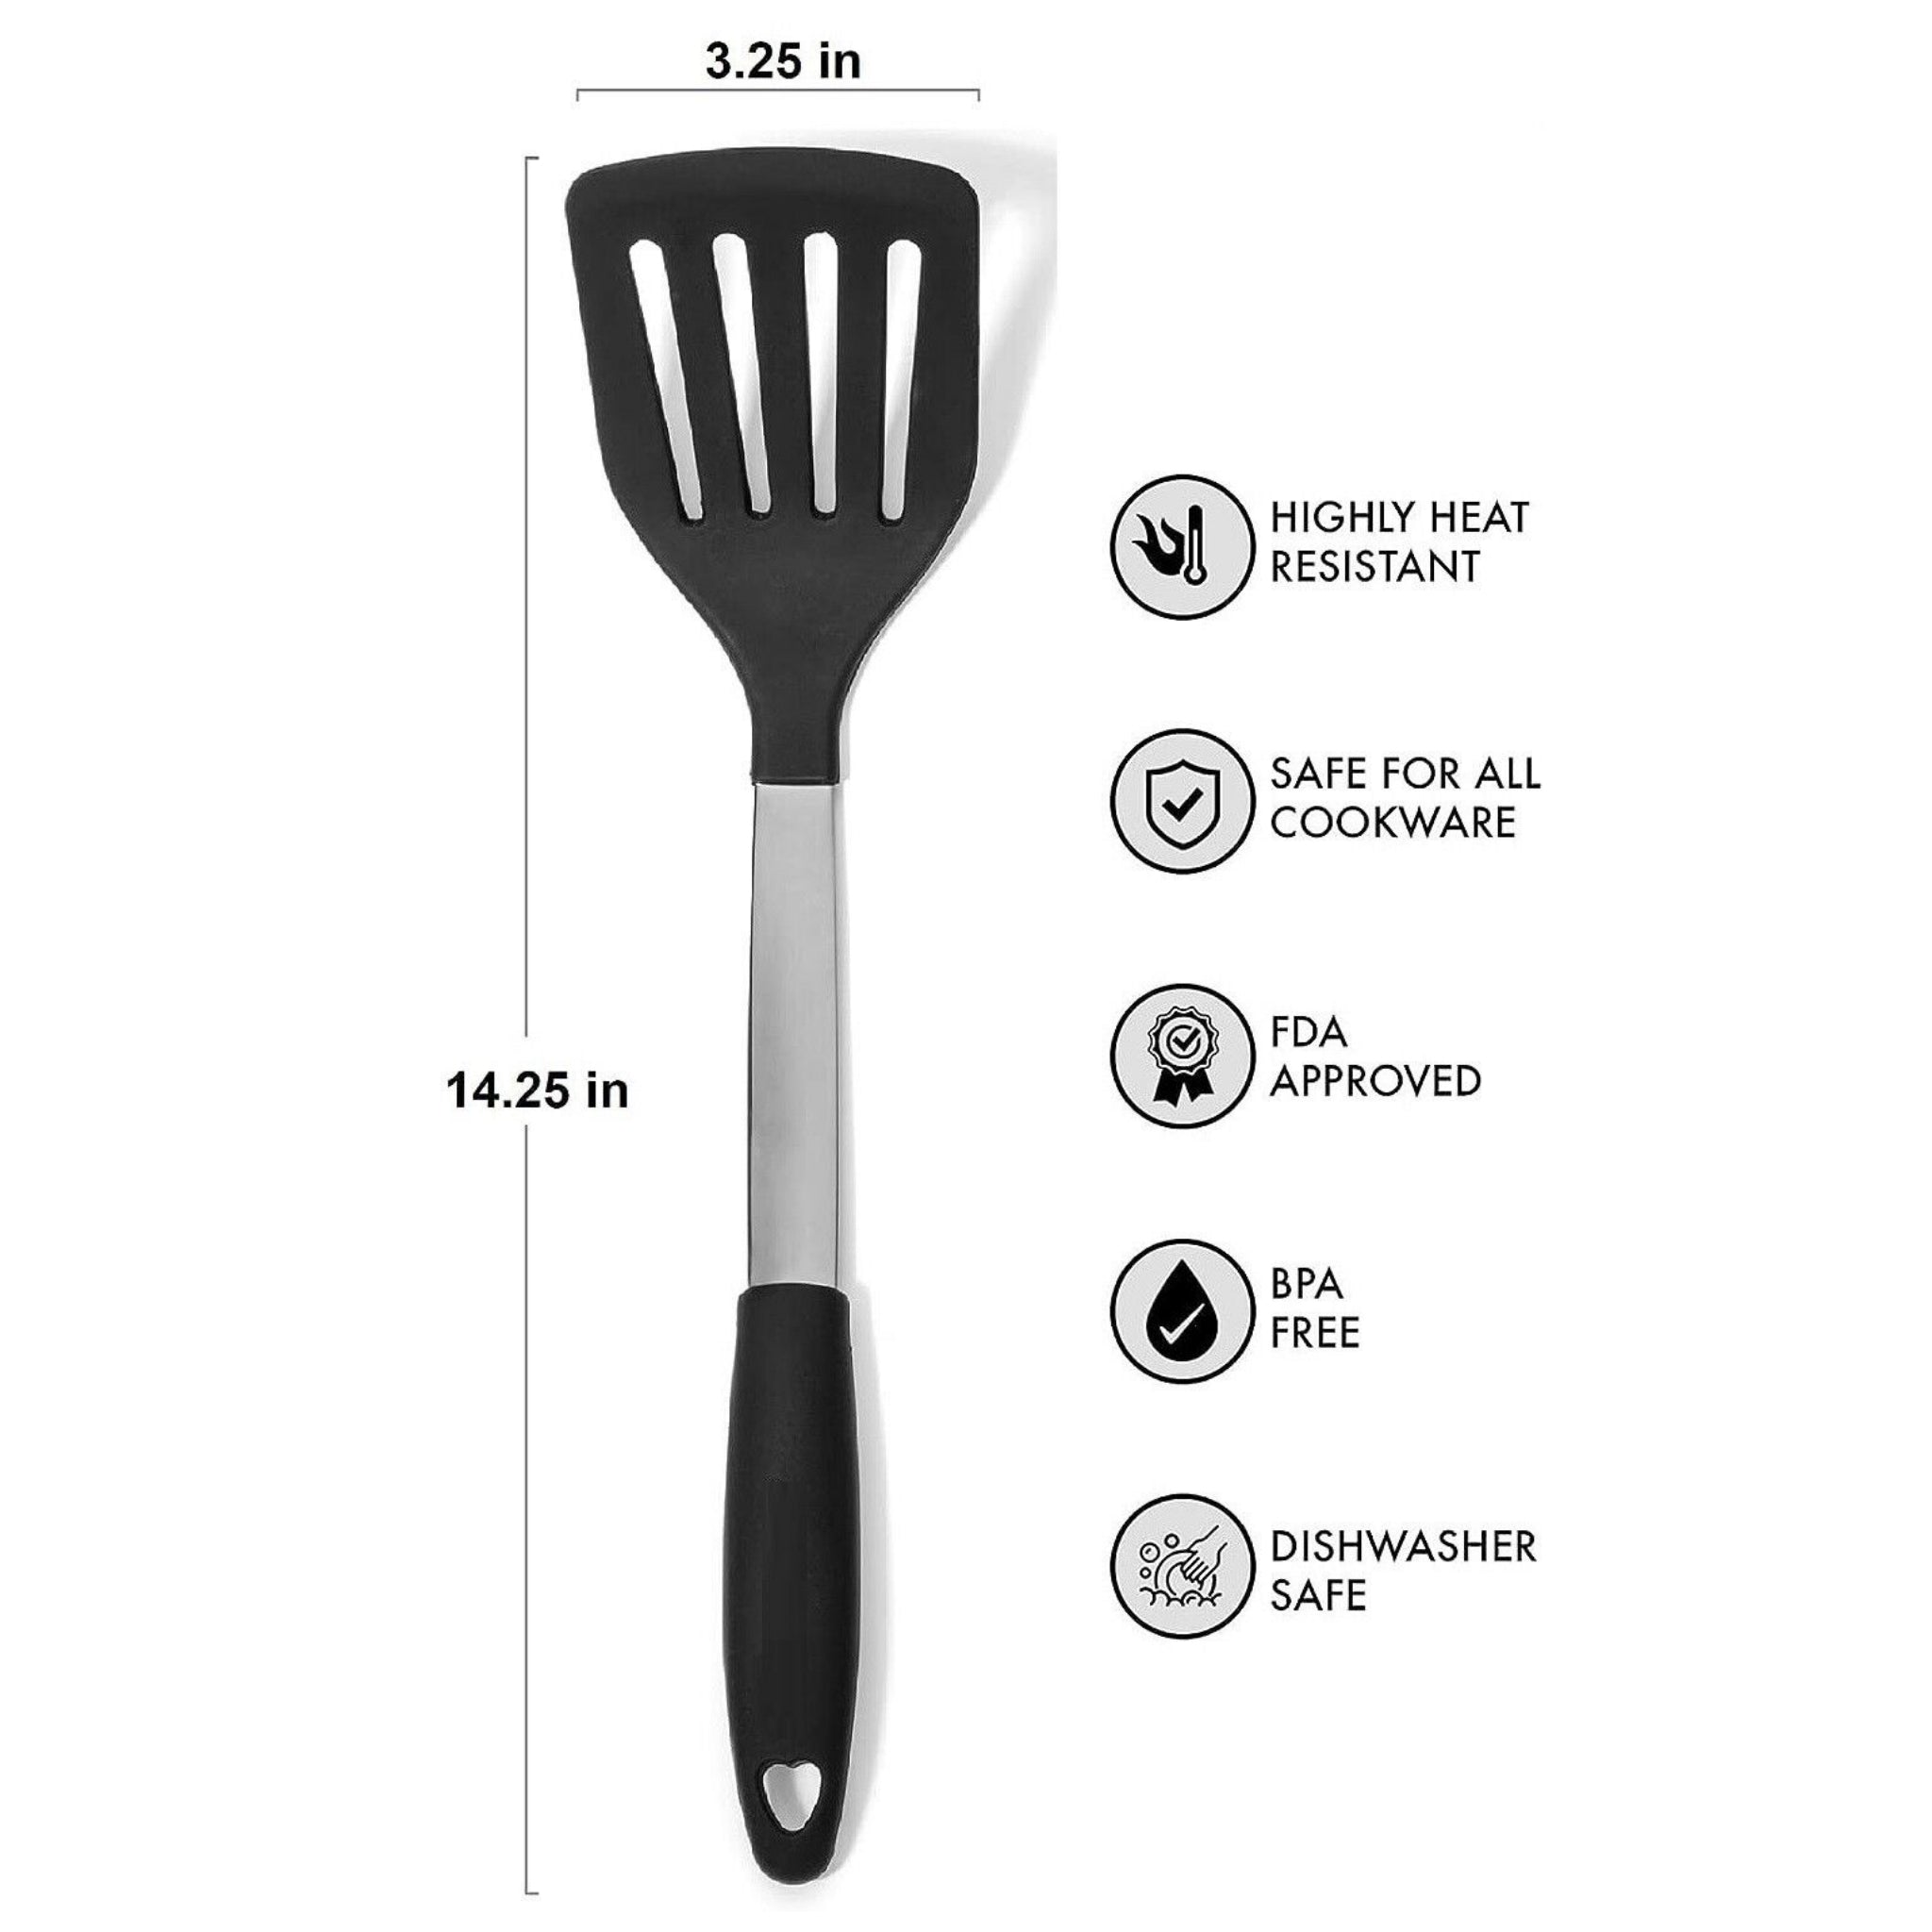 Slotted stainless steel toy spatula